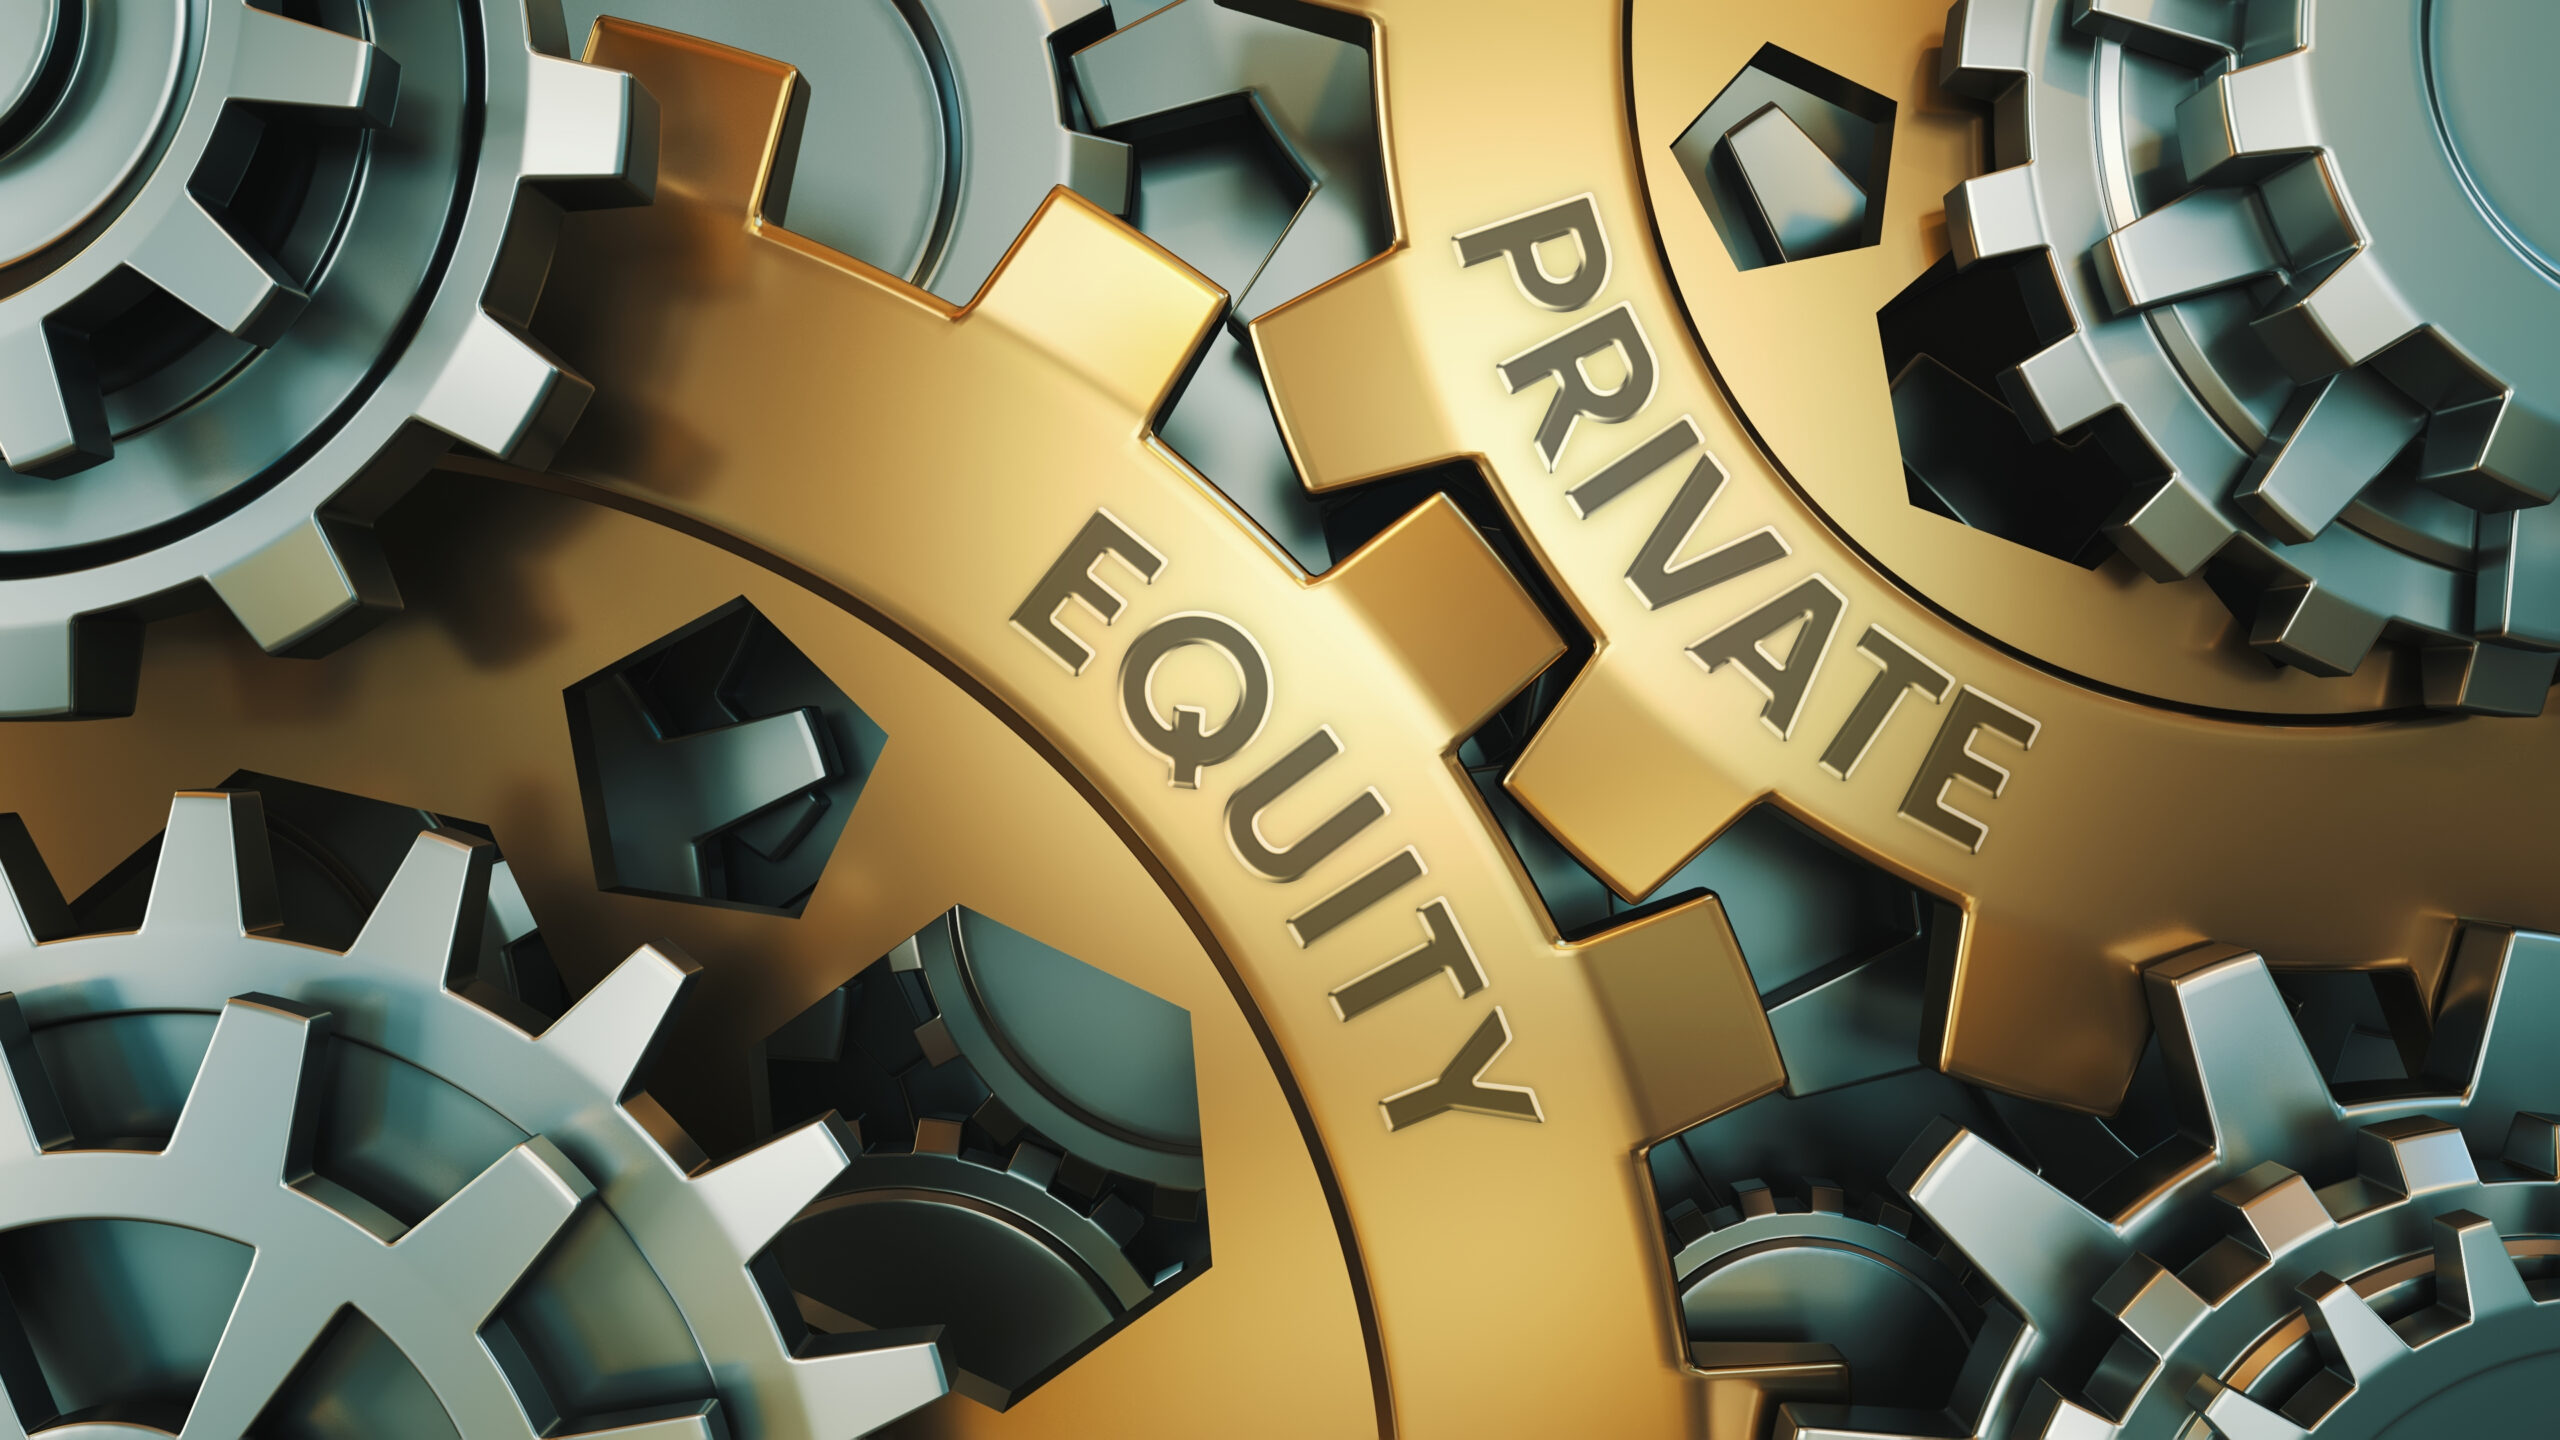 PRIVATE EQUITY concept. Gold and silver gear wheel background illustration. 3d render.